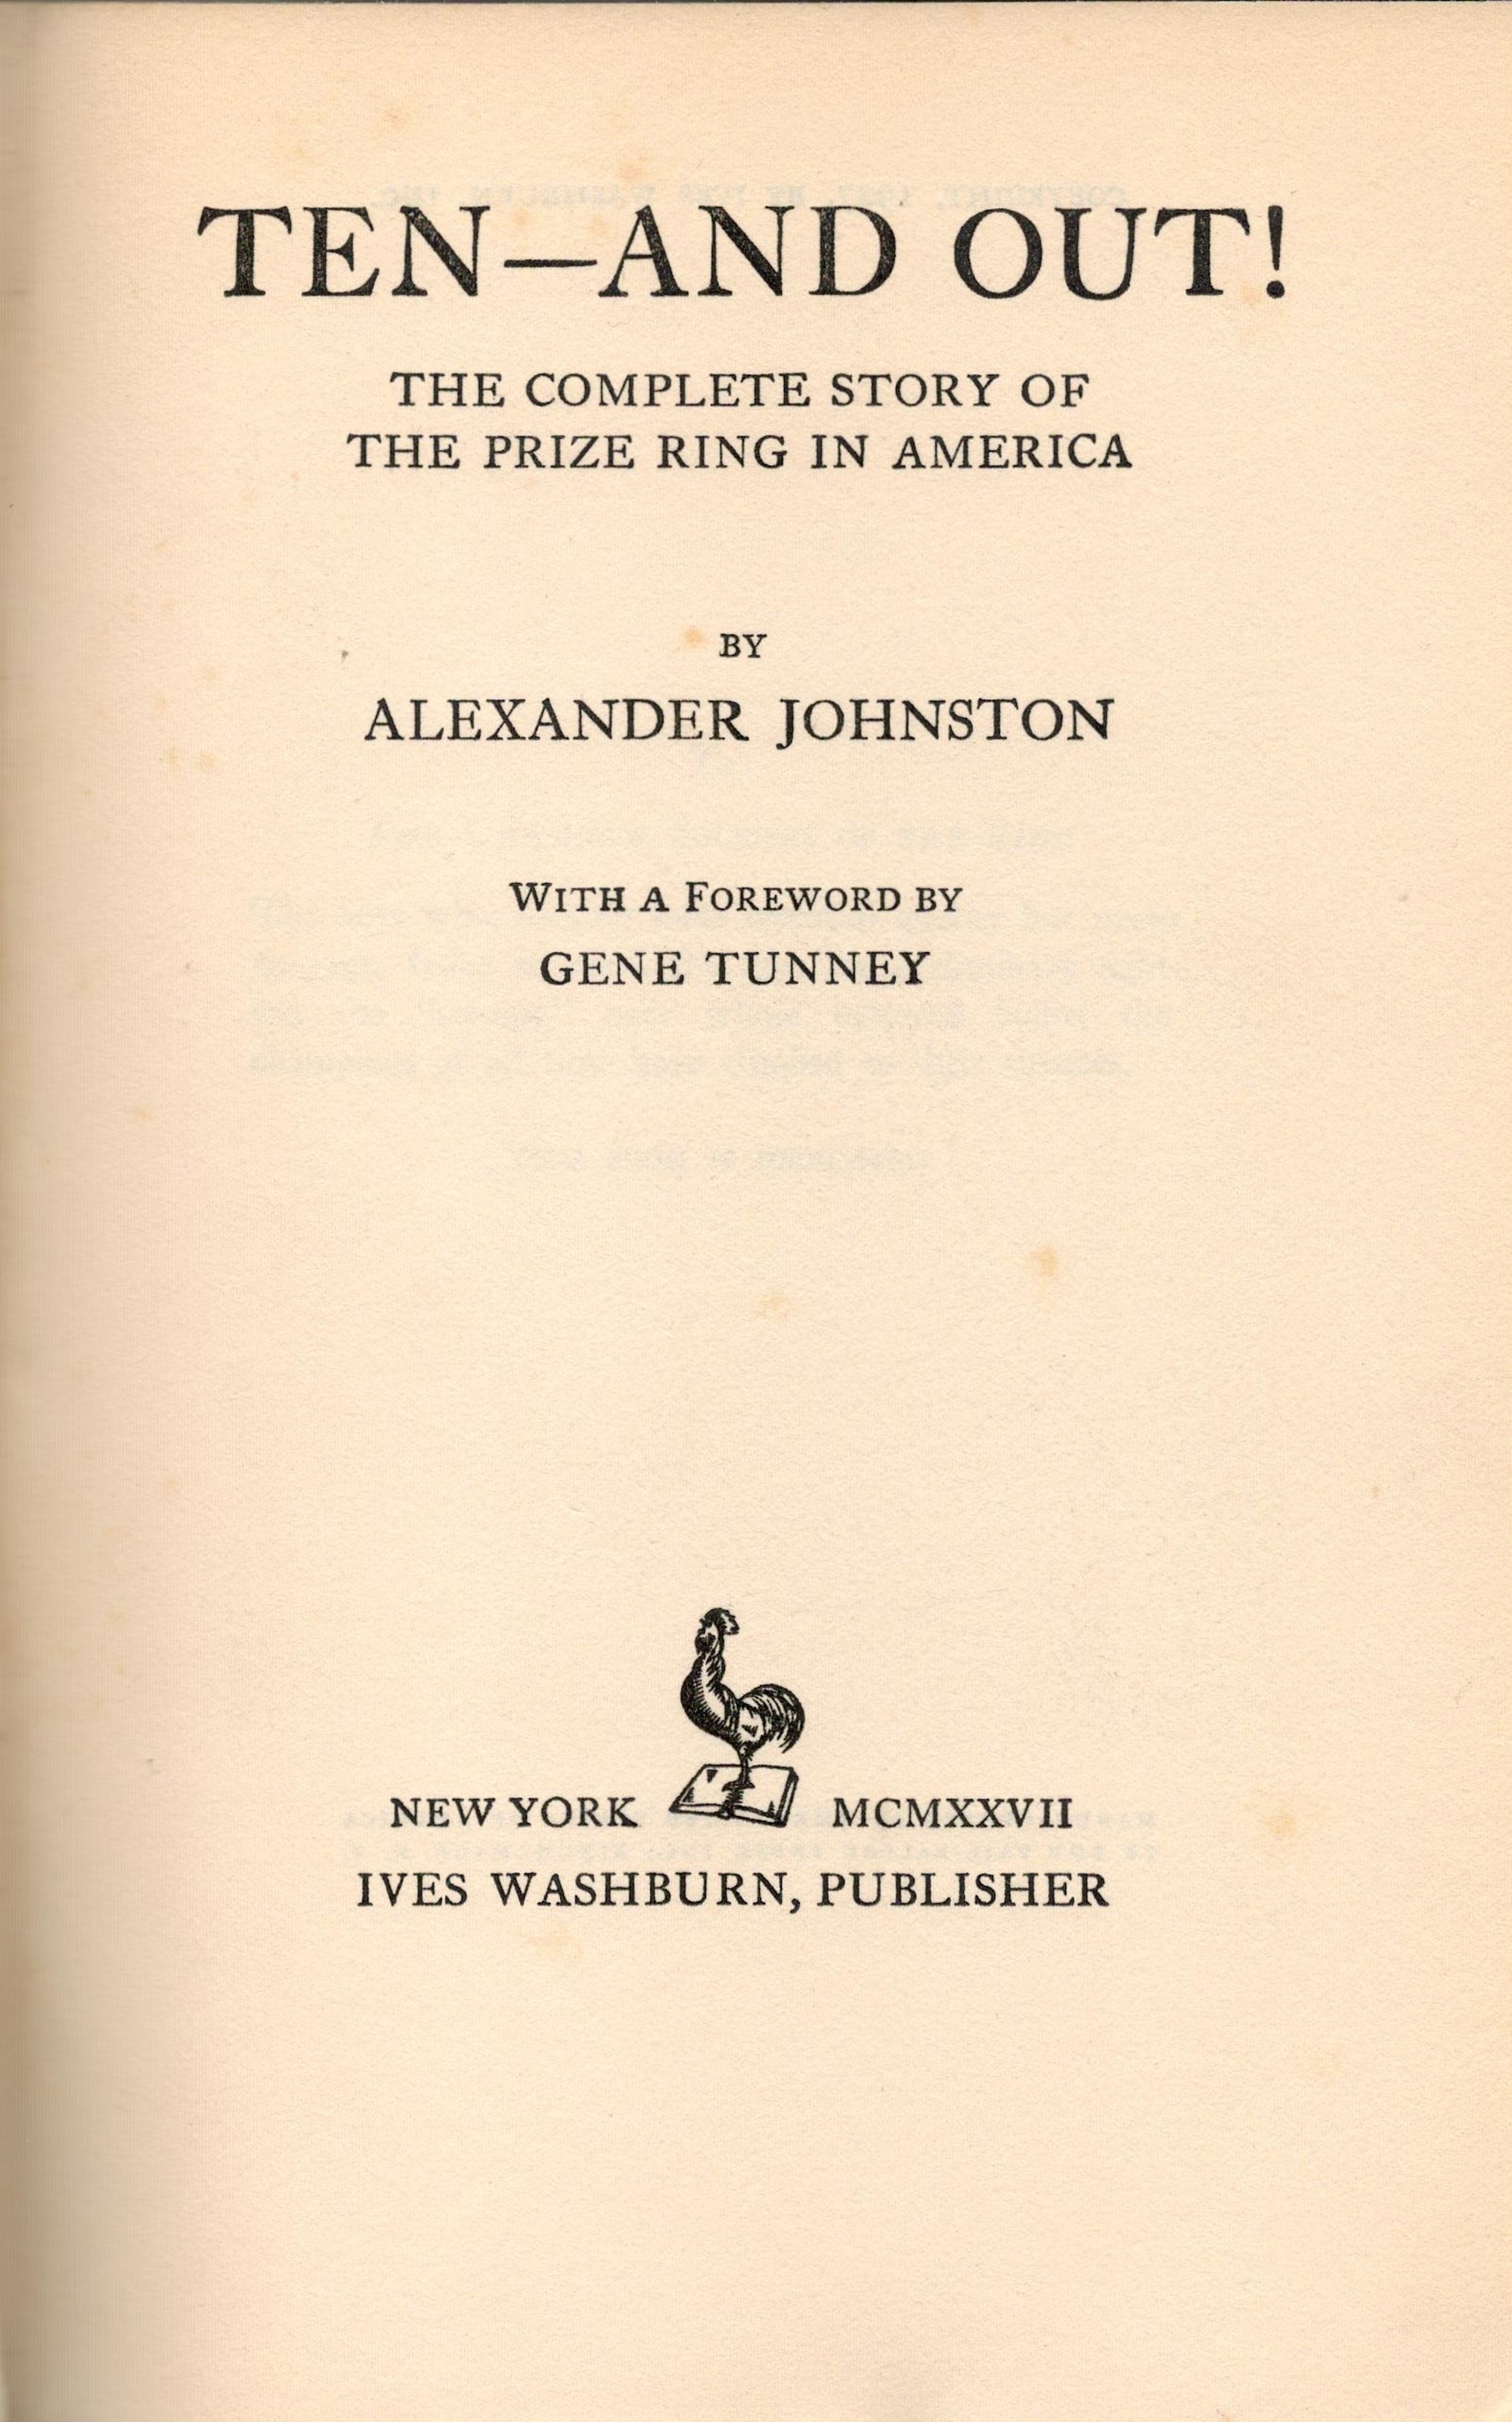 Ten and Out! By Alexander Johnston First Edition 1927 Hardback Book published by Ives Washburn Inc - Image 2 of 3